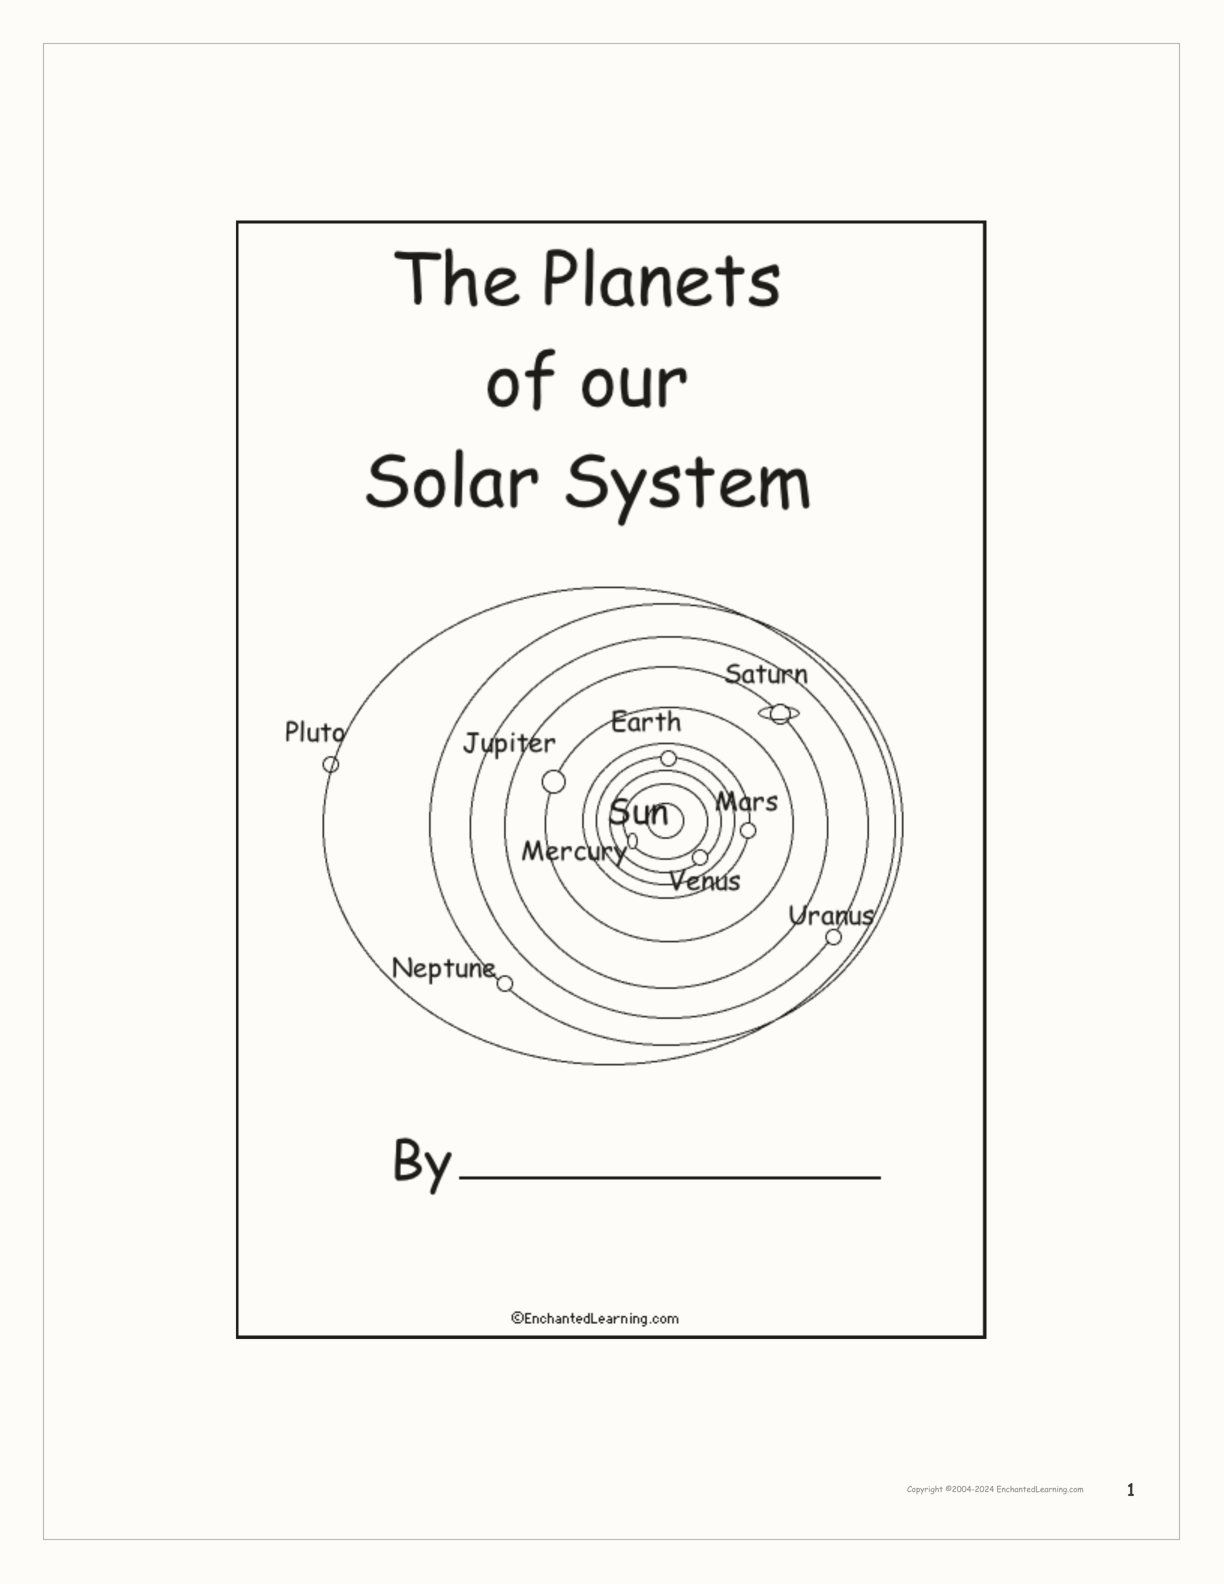 The Planets of our Solar System Book interactive printout page 1